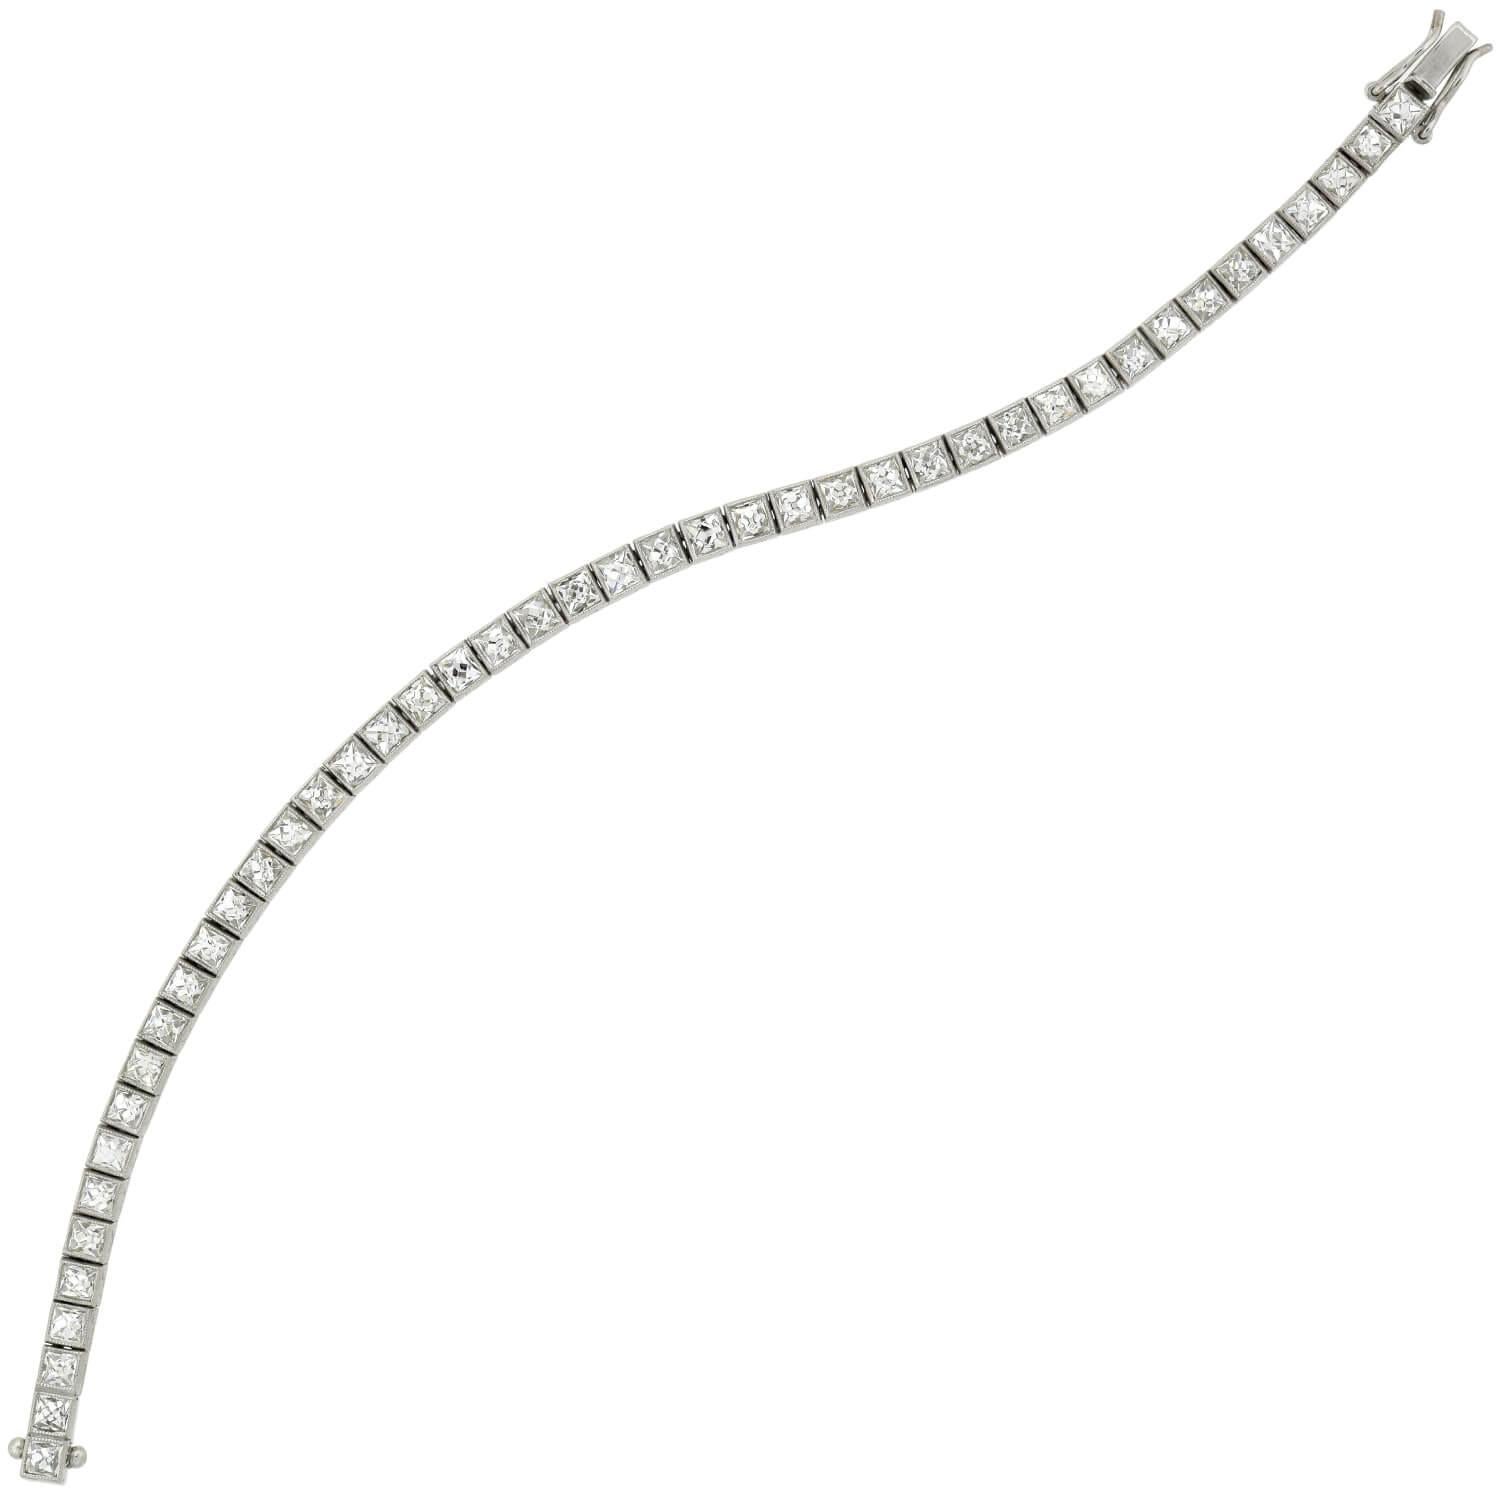 An absolutely stunning contemporary diamond line bracelet! Crafted in platinum, this gorgeous piece is comprised of 45 stunning French Cut diamond links. Each faceted diamond stone is held within a box setting to create a straight yet flexible